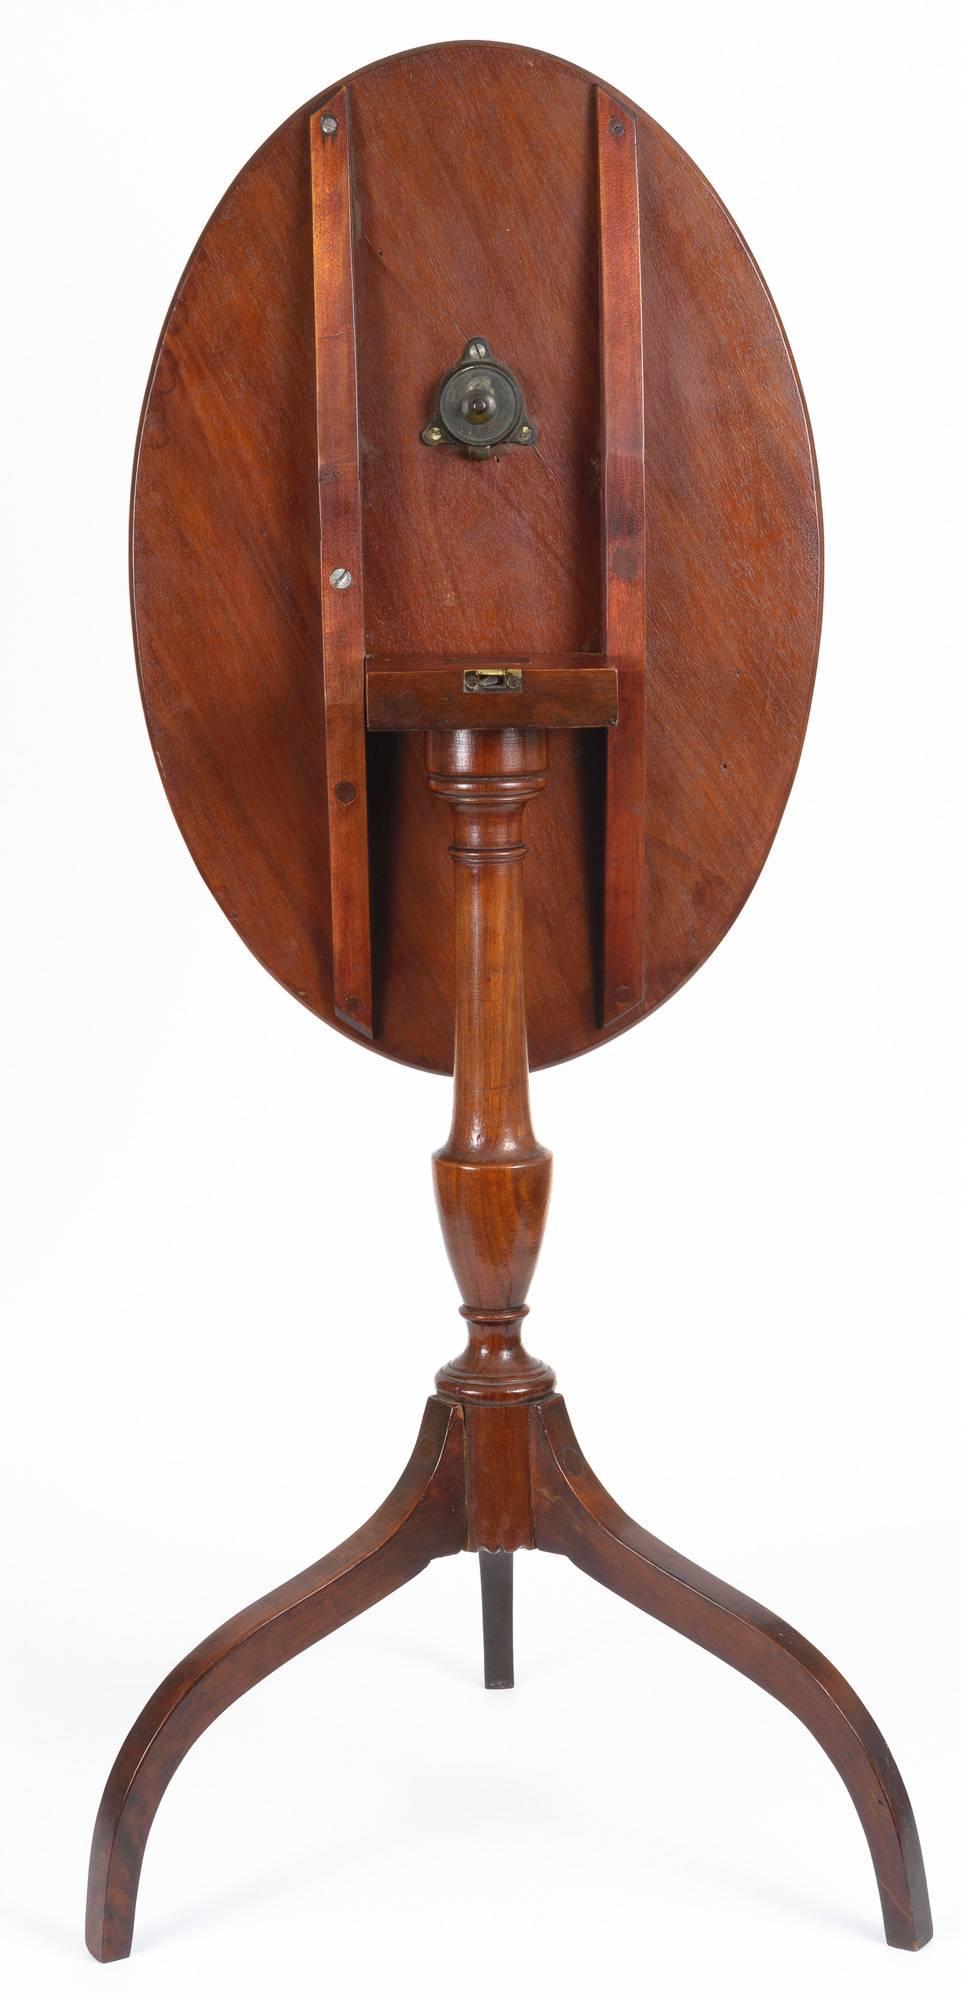 American Hepplewhite tilt-top candle stand with oval top of figured wood. The column has urn and concave turnings with delicate curve detail at the base. The splayed legs are well proportioned. The parts of the table are mortised joinery.
The